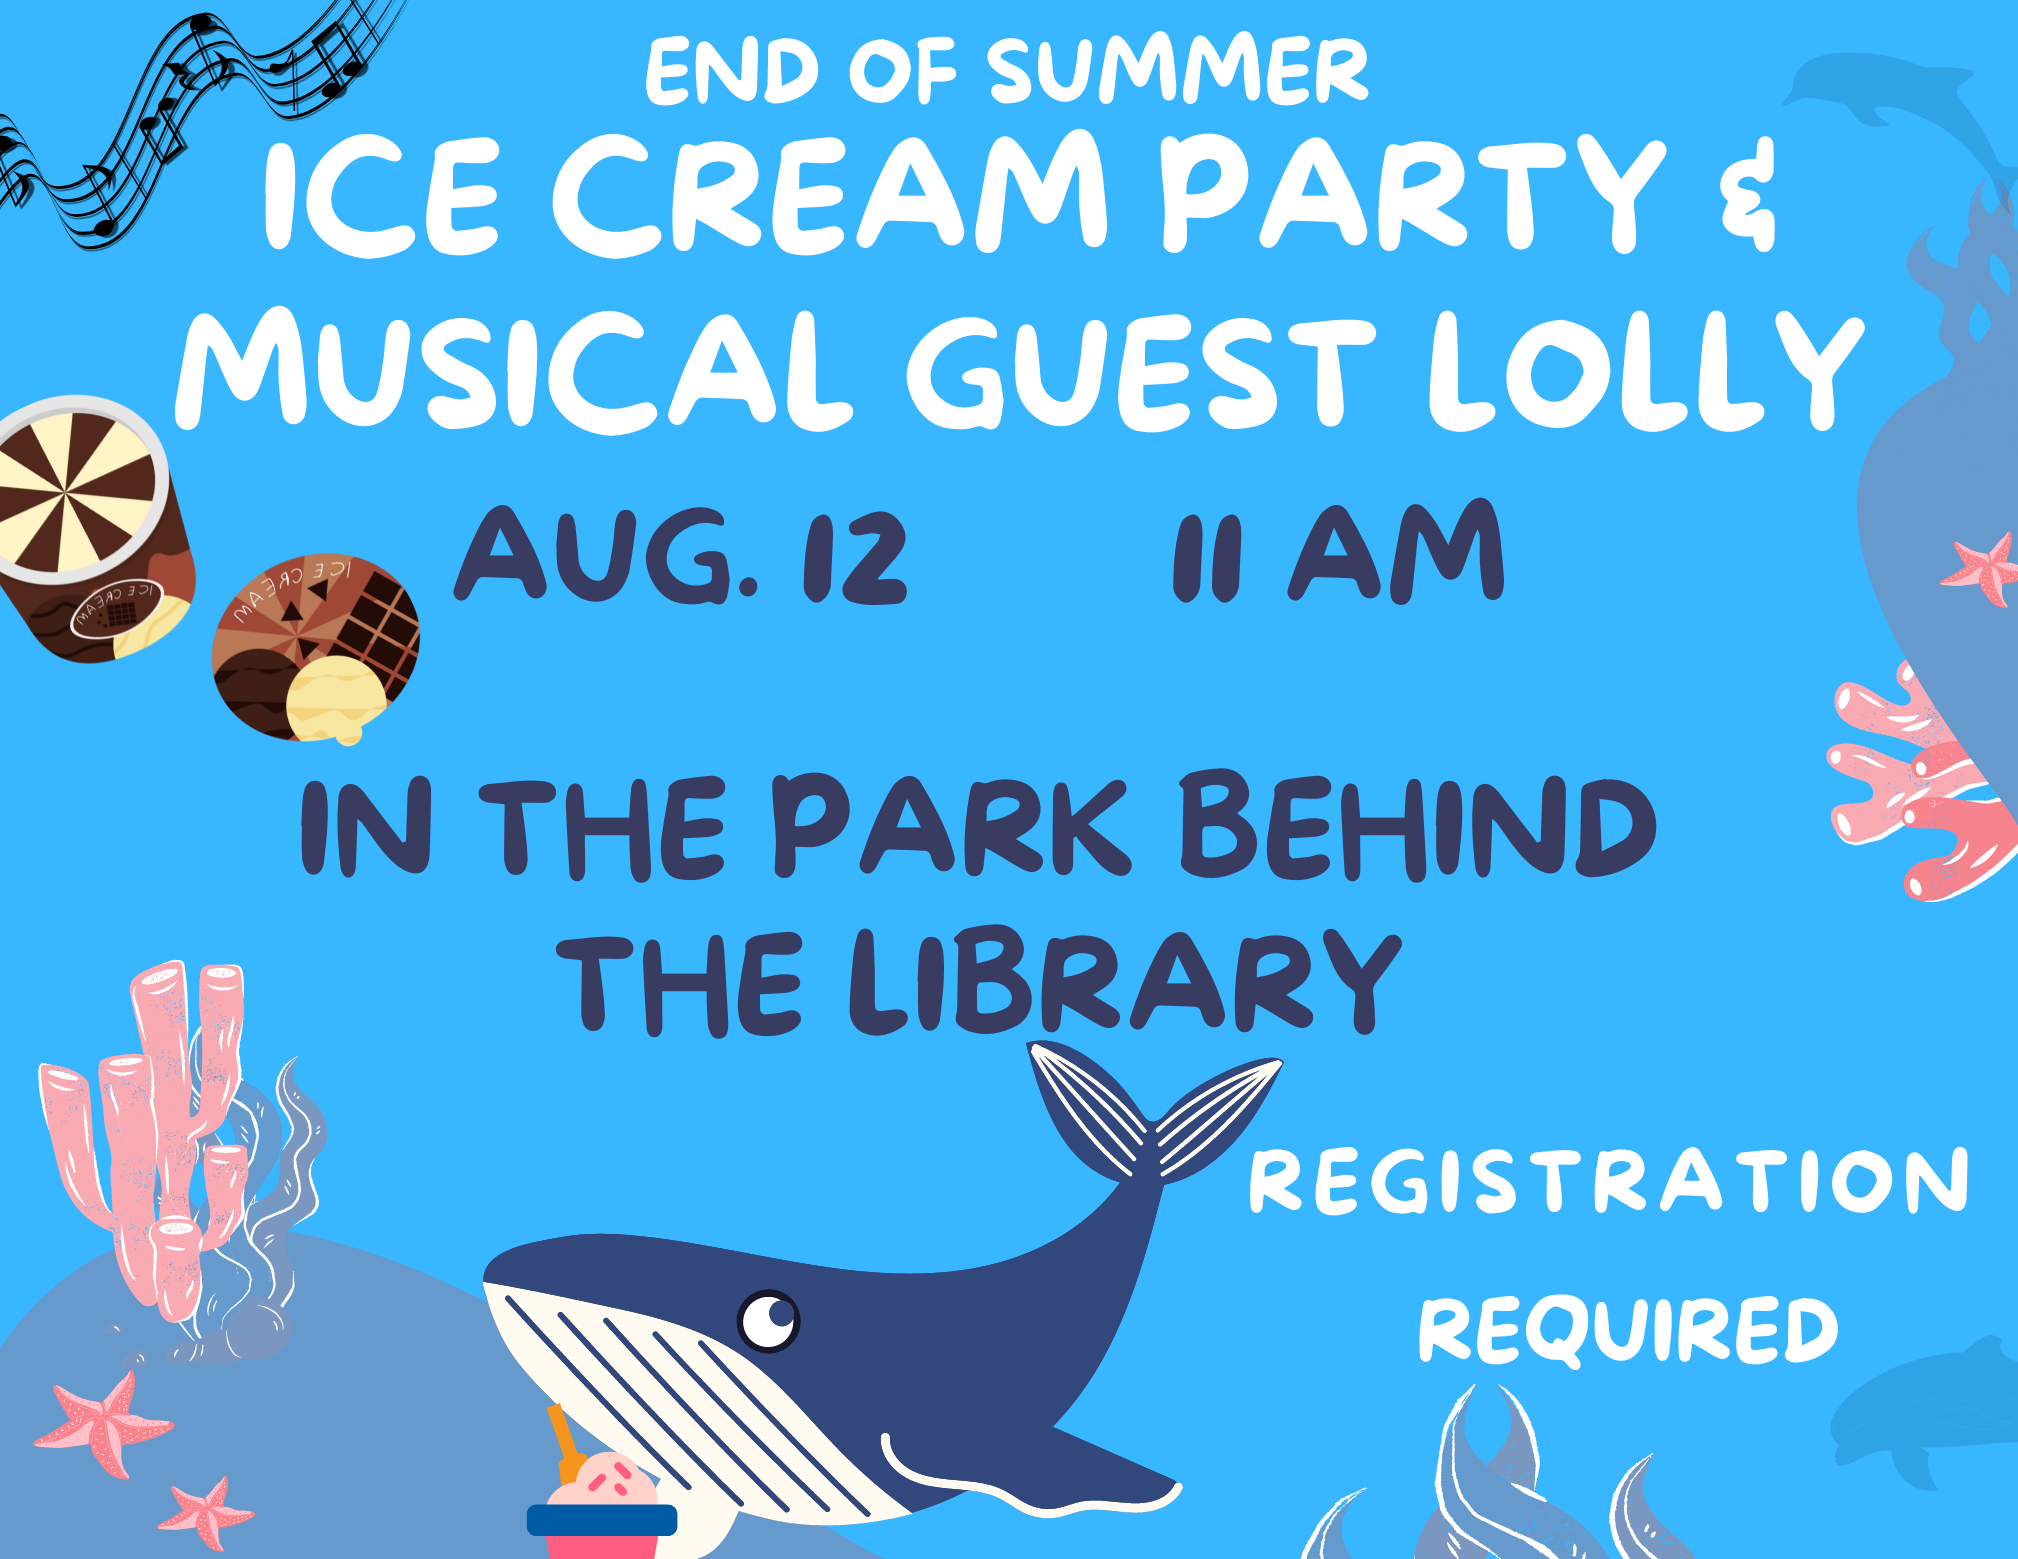 End of Summer Ice Cream Part & Musical Guest Lolly Aug 12 11 AM In the Park Behind the Library Registration Required, background graphics look like the ocean with a whale eating ice cream and some musical notes